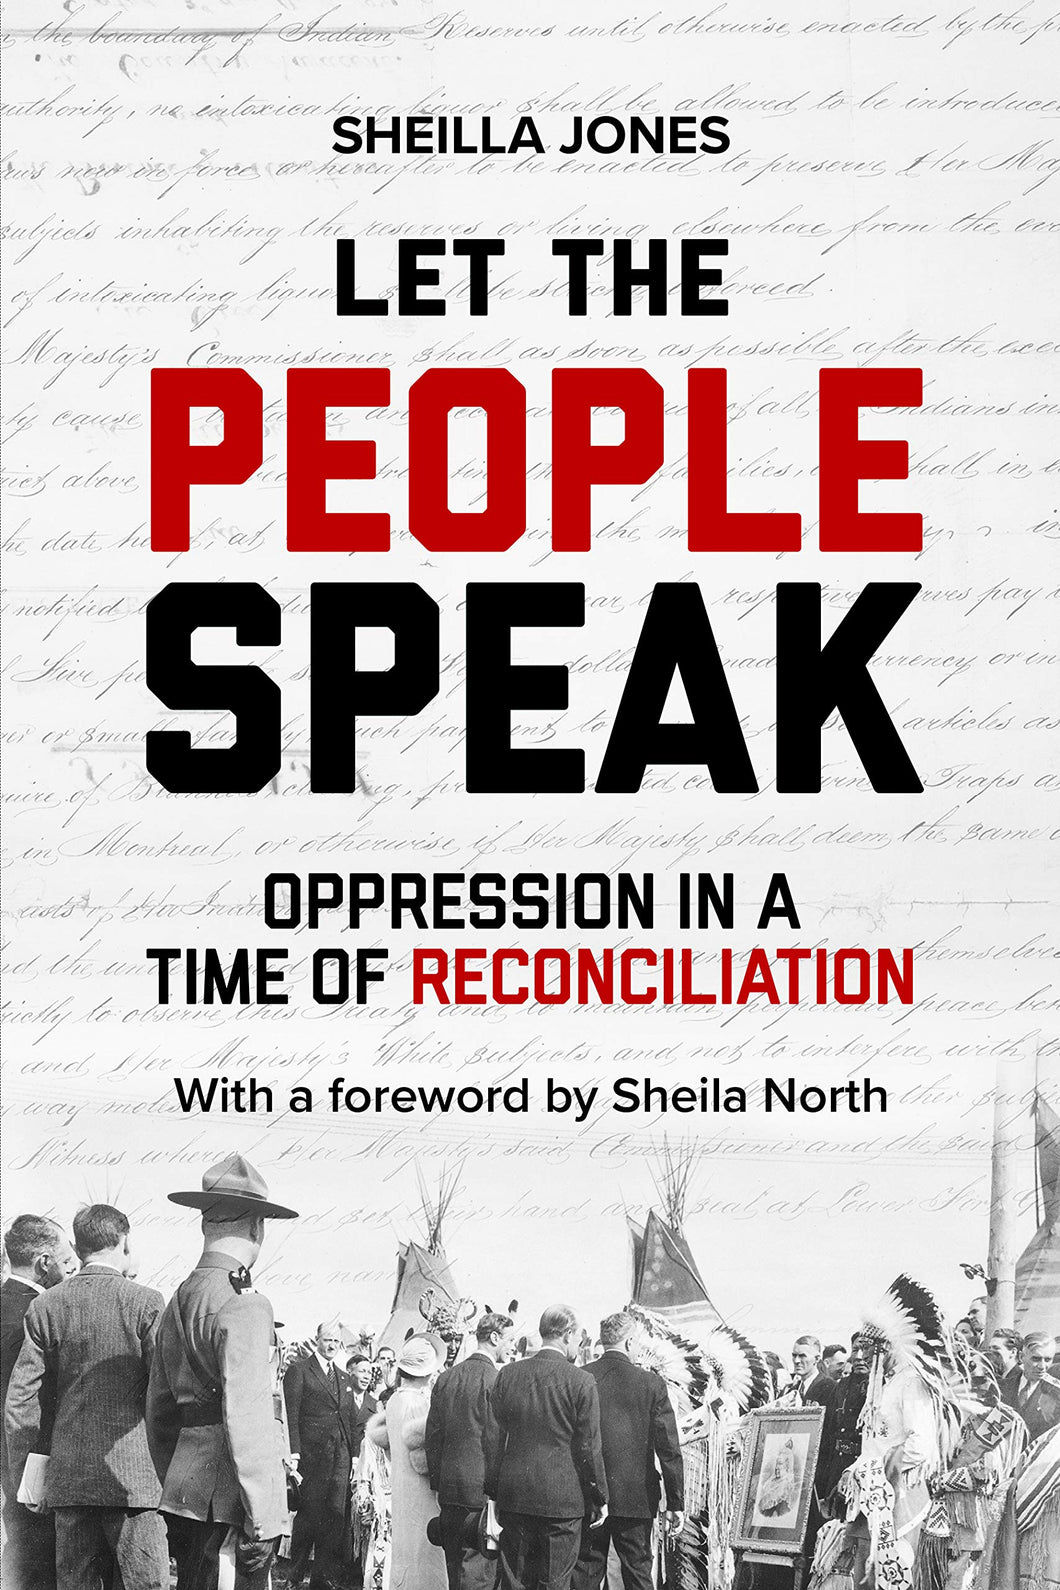 Let the People Speak: Oppression in a Time of Reconciliation [Sheilla Jones]